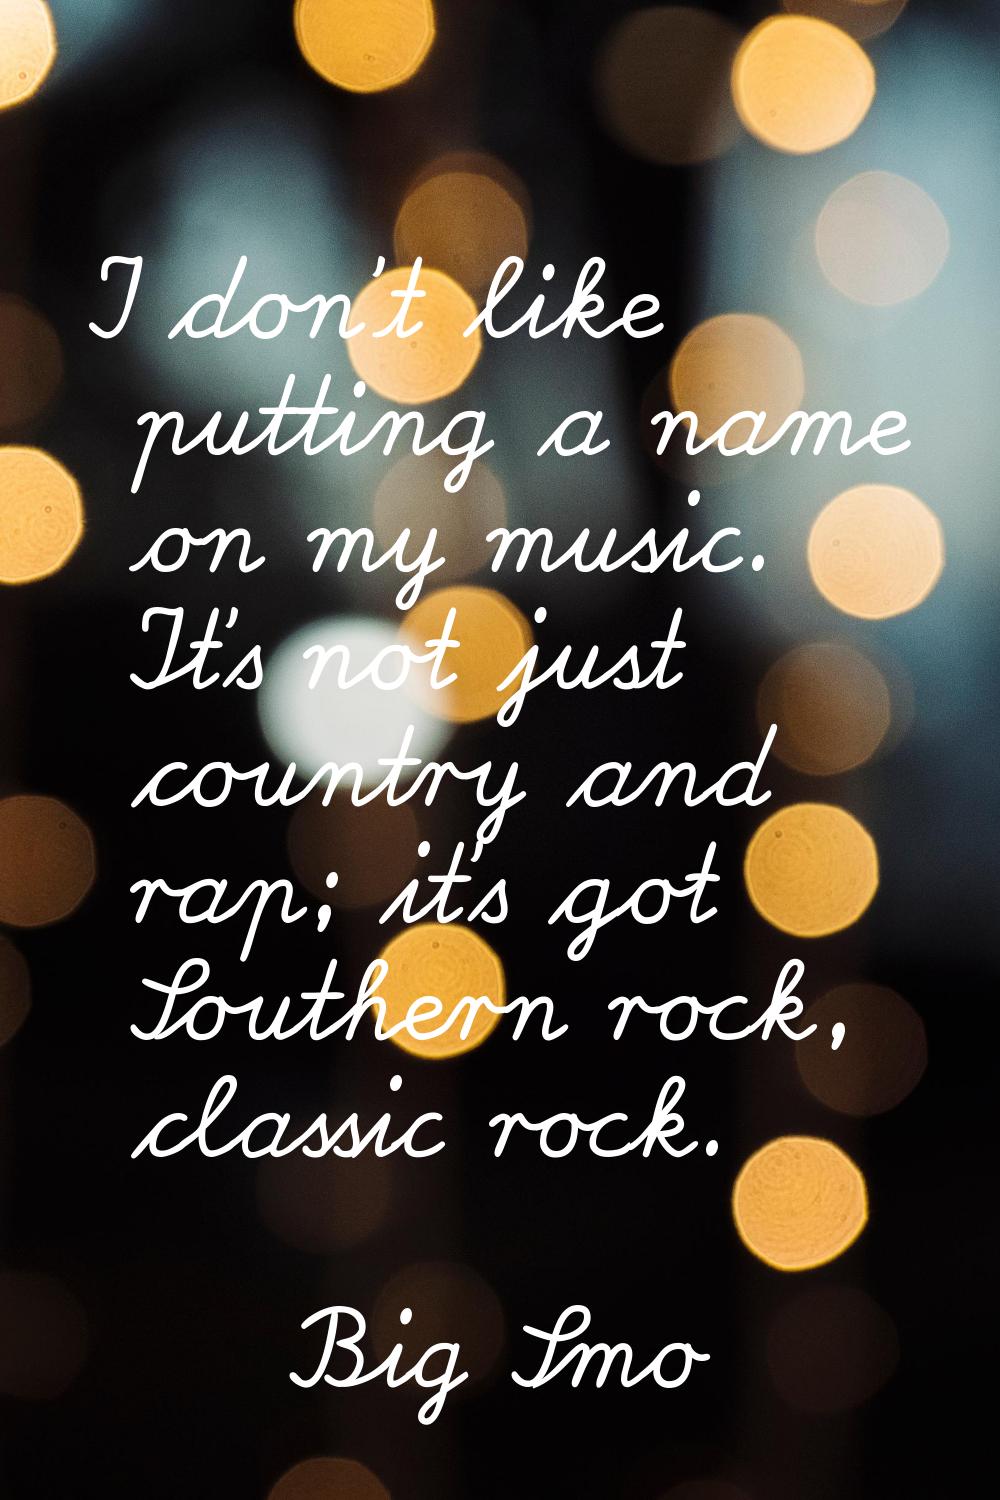 I don't like putting a name on my music. It's not just country and rap; it's got Southern rock, cla